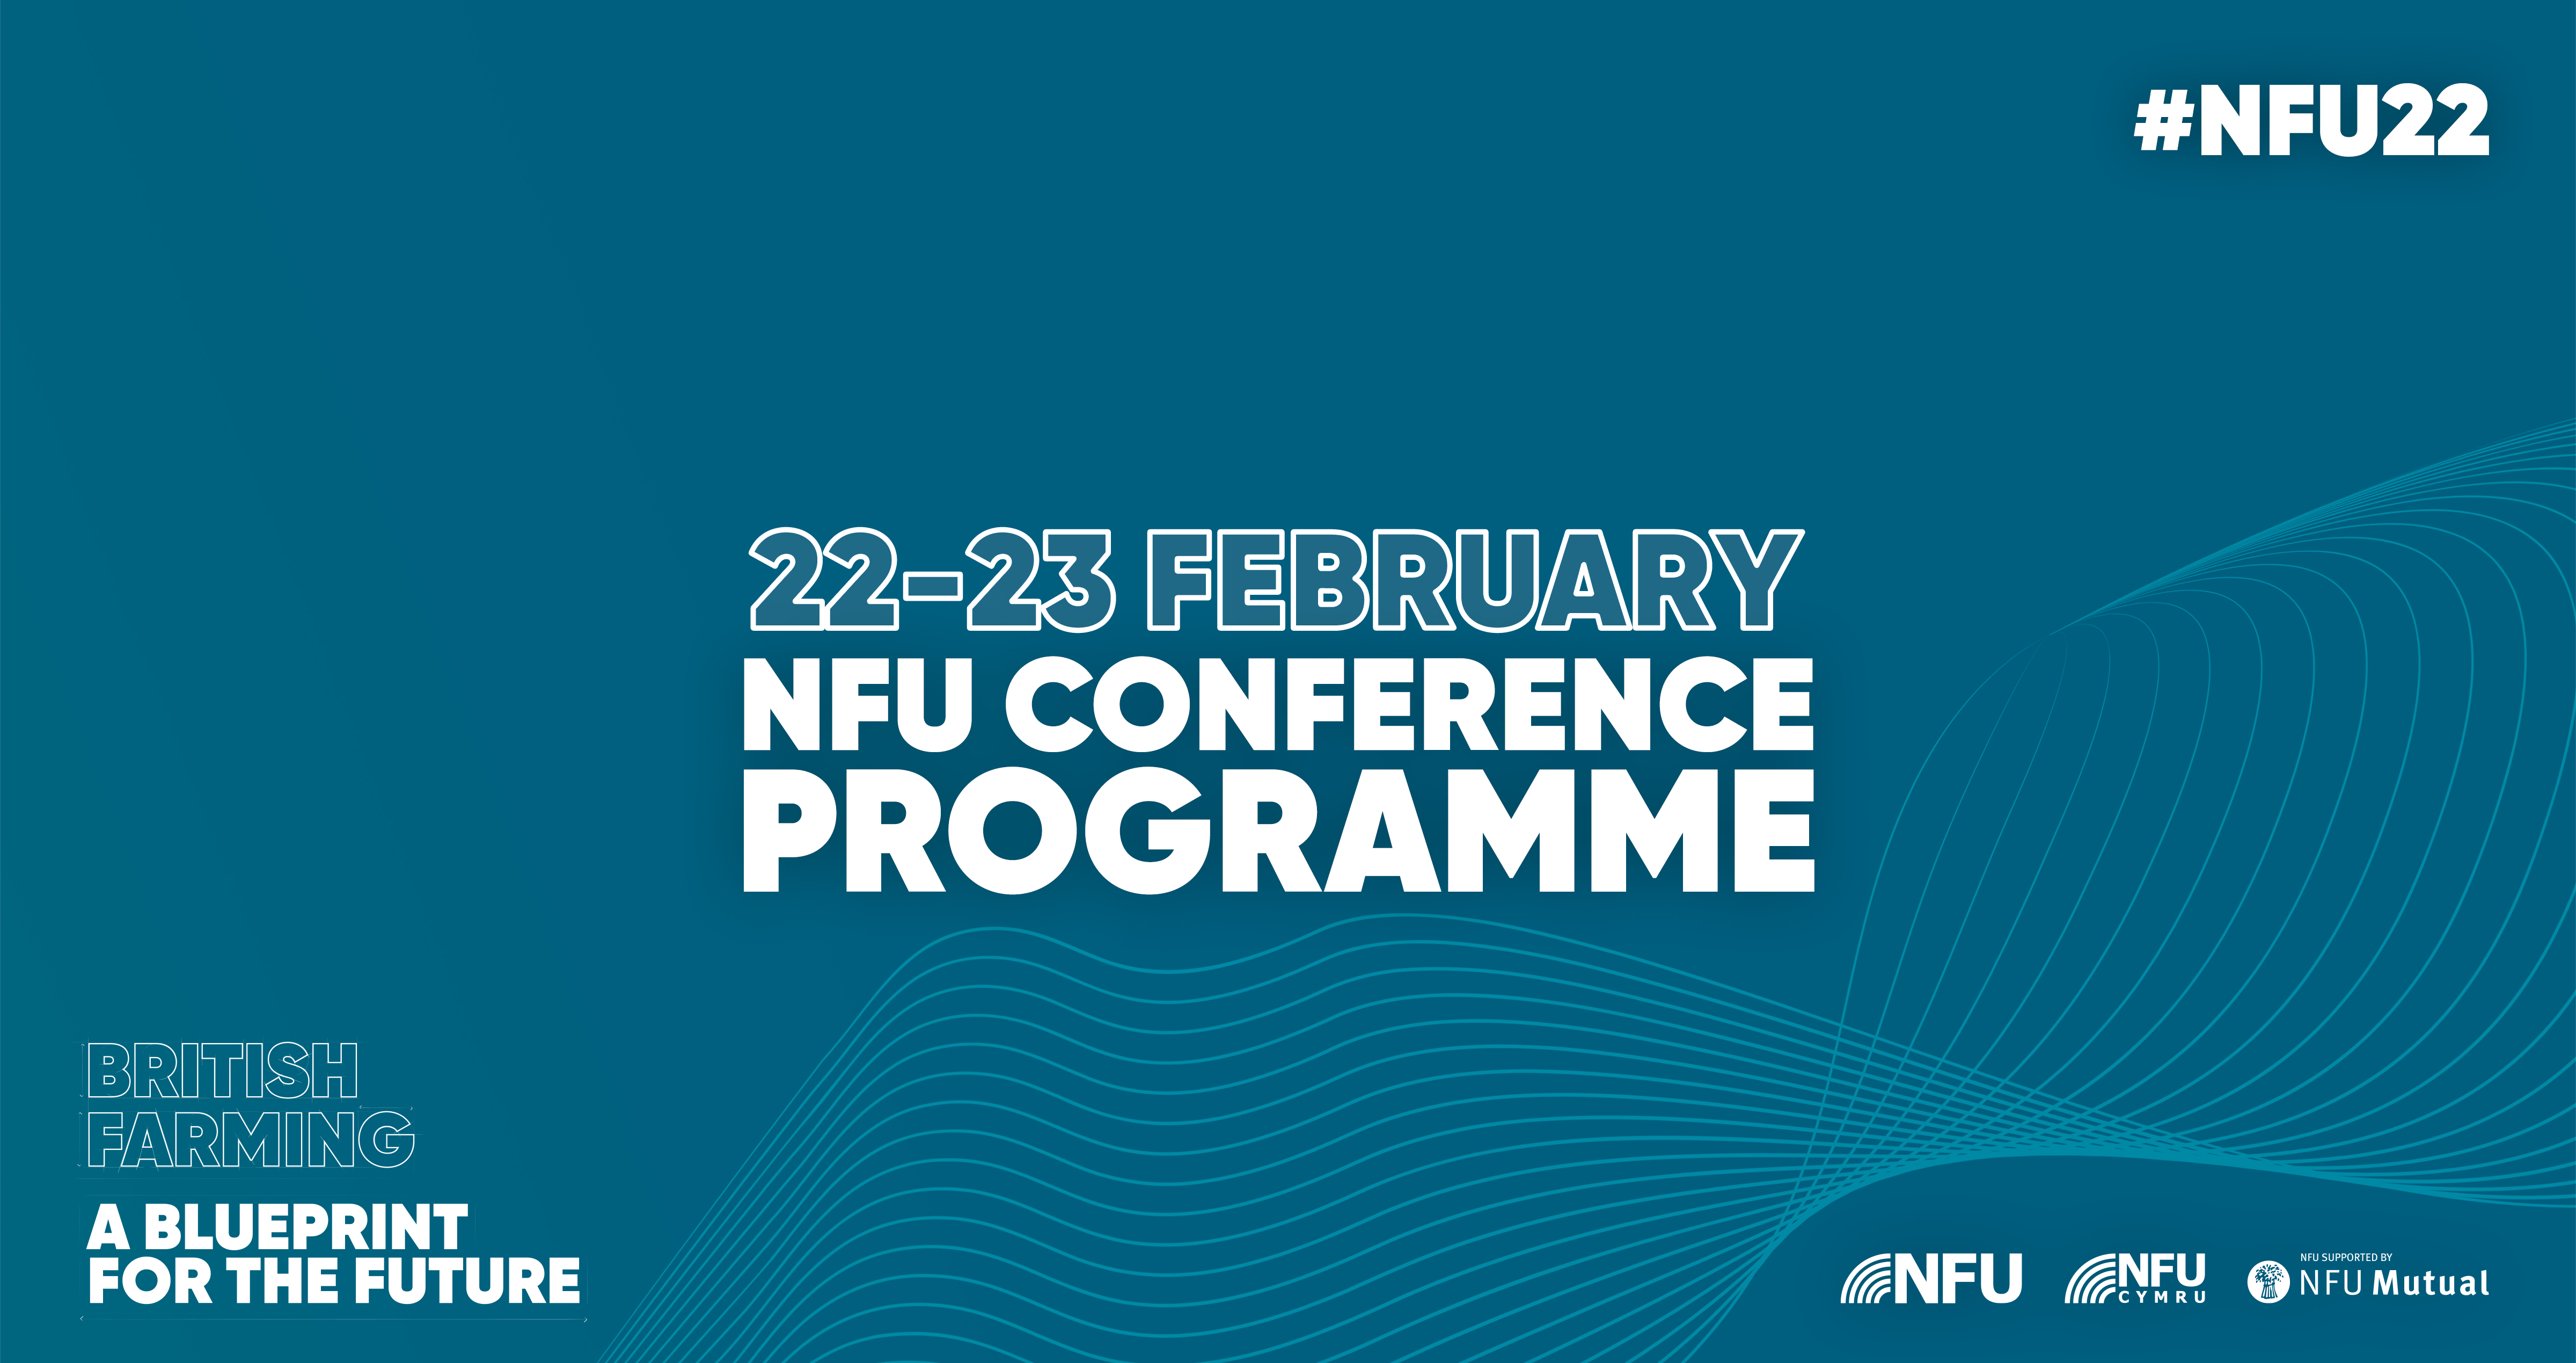 A promotional image for the NFU's 2022 annual conference